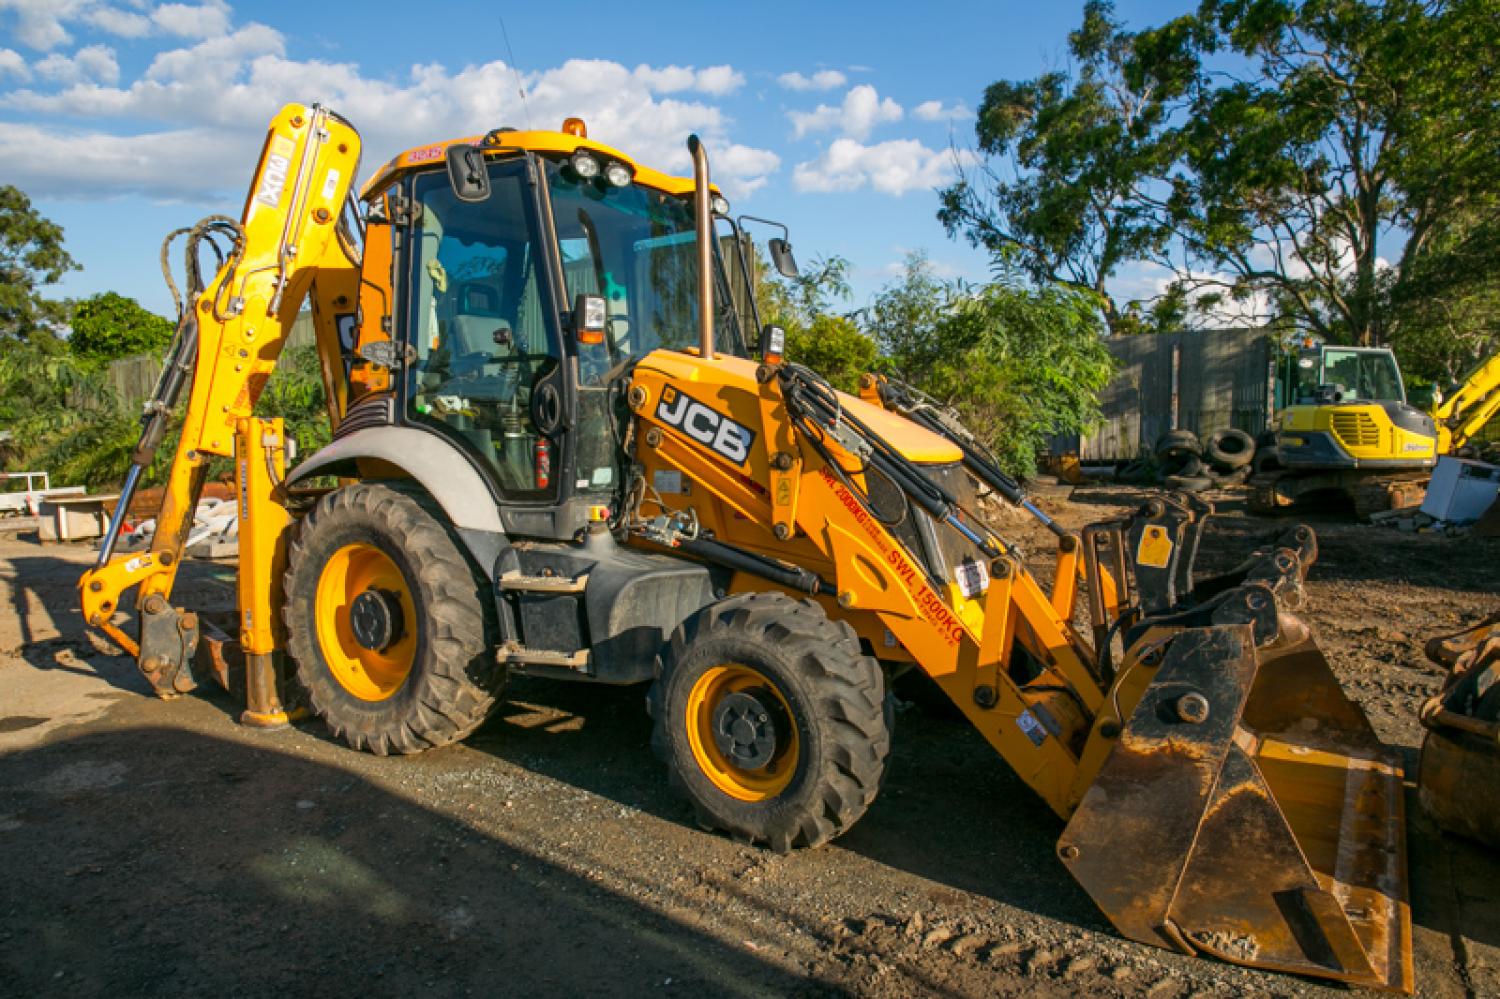 Should you require domestic or commercial site storm damage clean-up, at BPH Brancatella Plant hire we are available 24 hours a day to provide you with the machinery with experienced operators to clean up branches/tress and other debris that has fallen on your site.